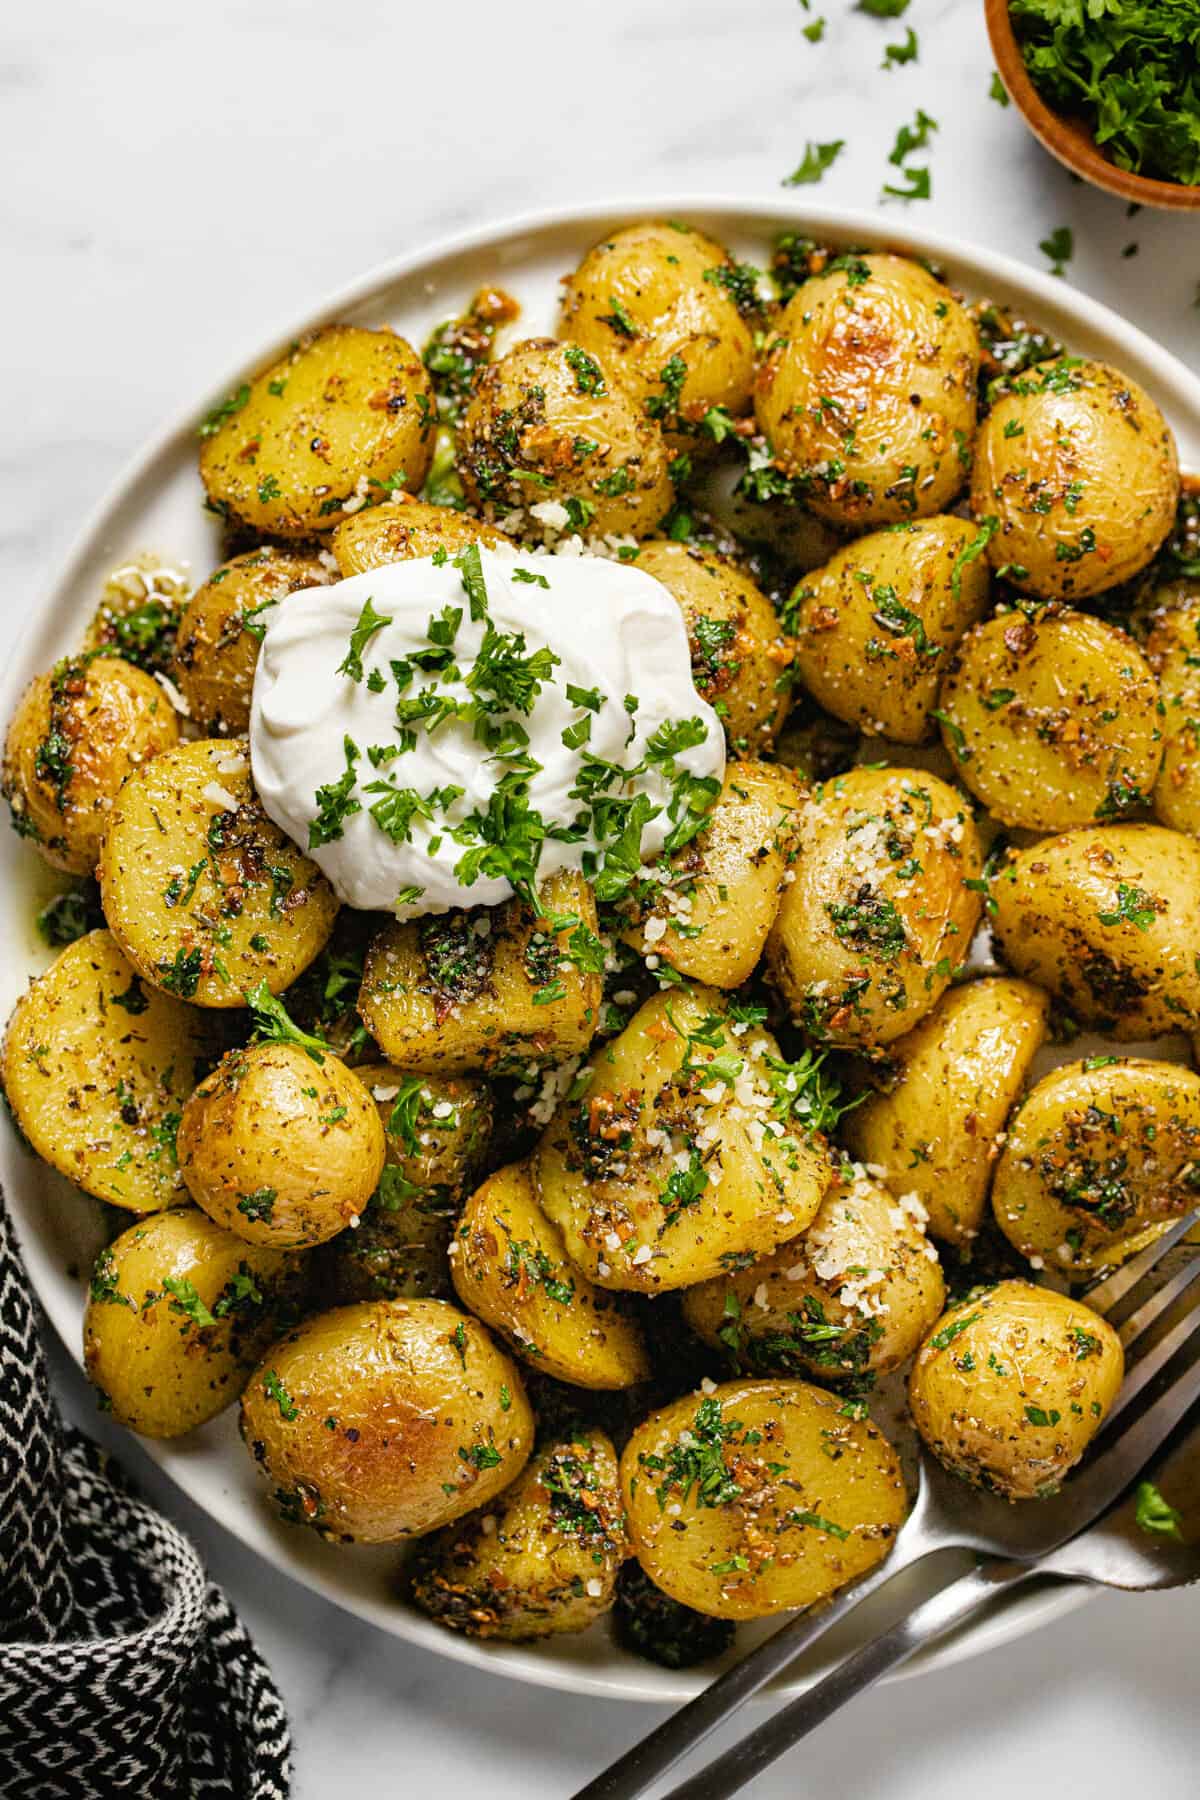 Roasted Baby Potatoes - Midwest Foodie